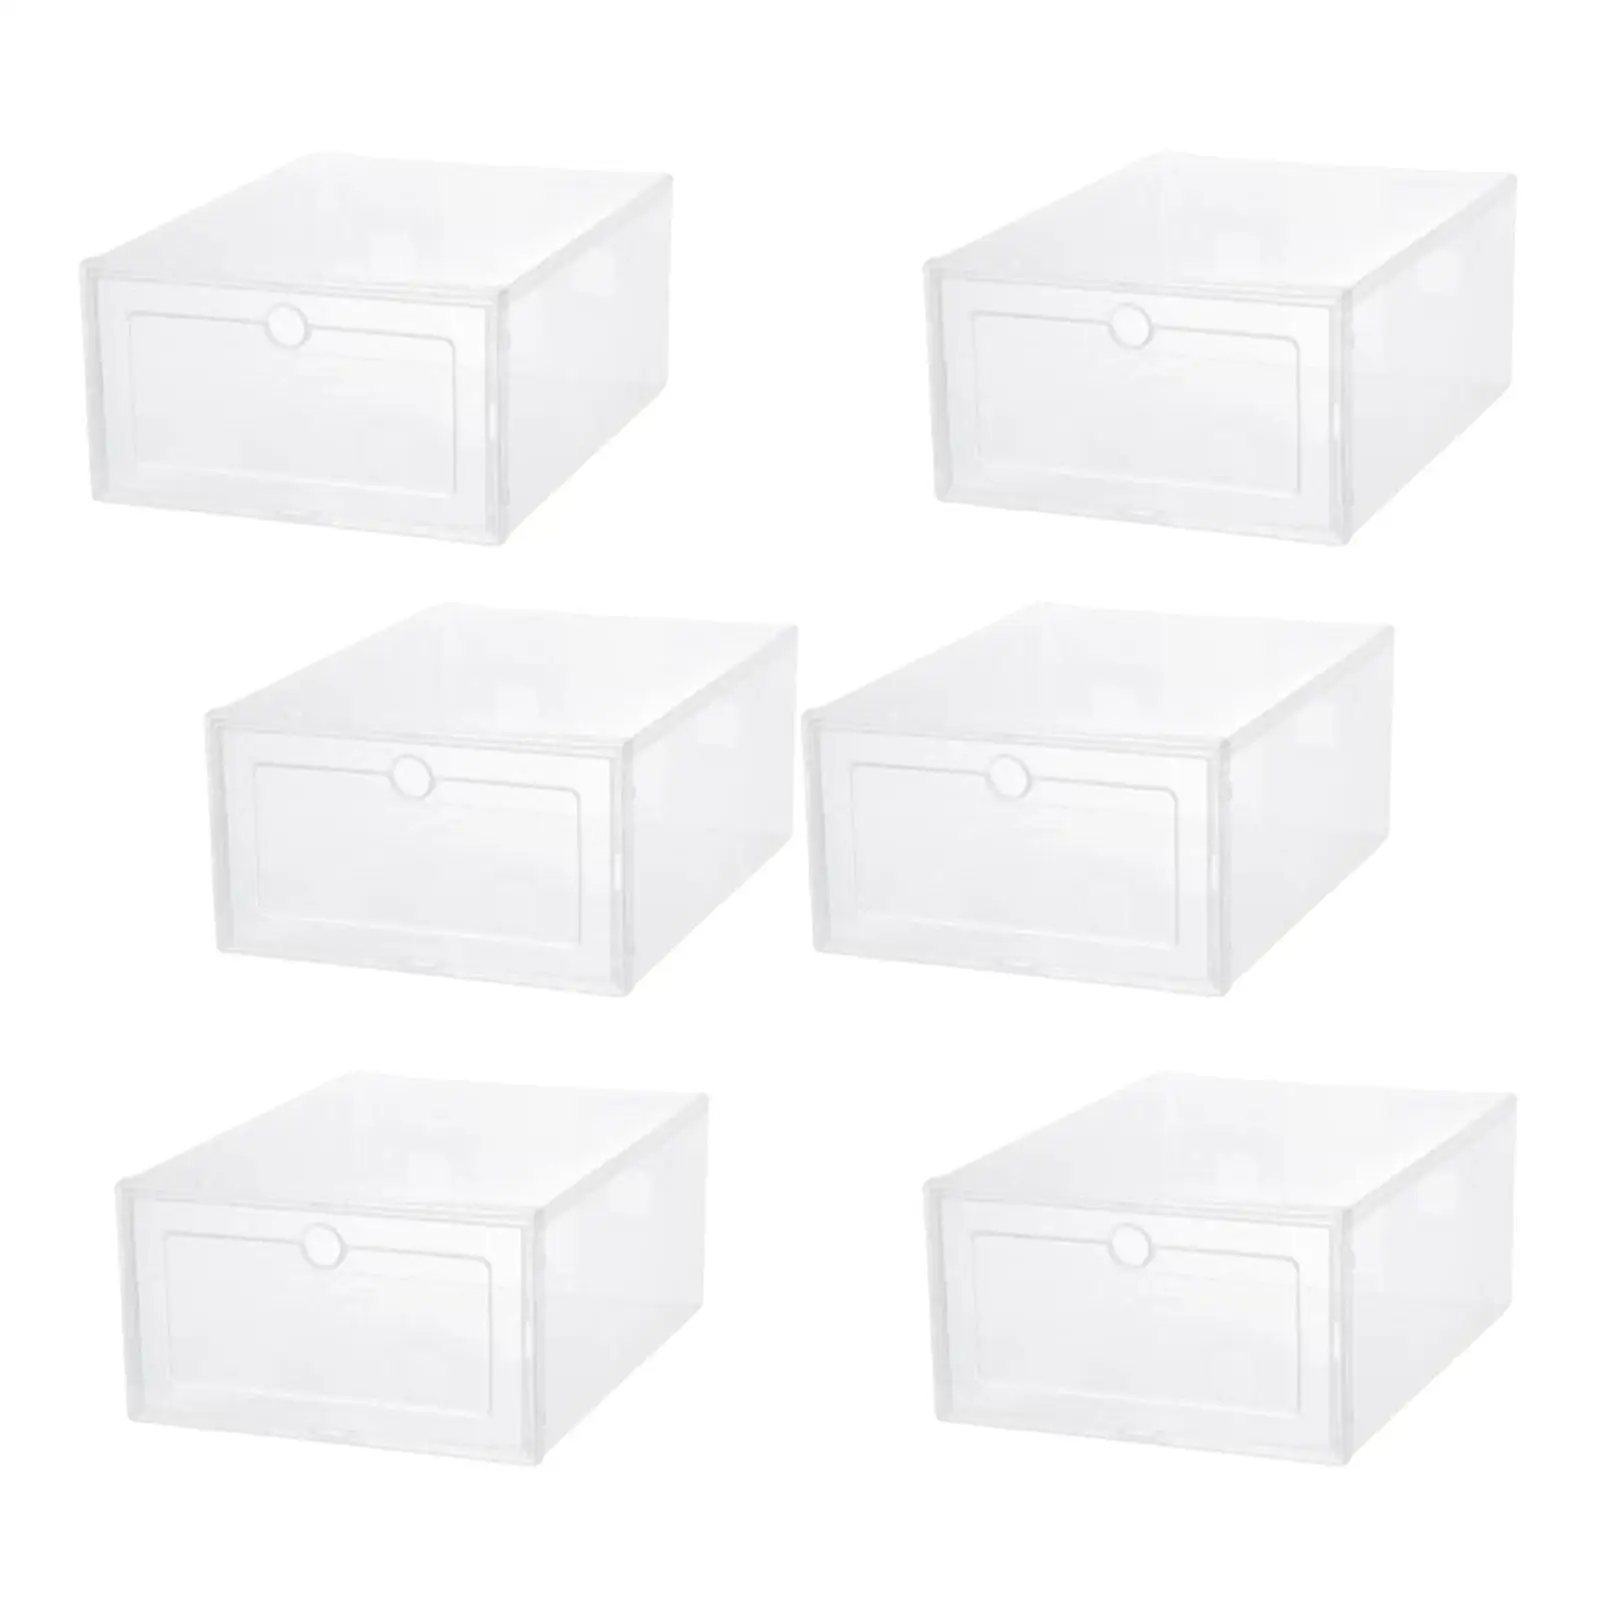 6Pieces Transparent Shoe Storage Box Dustproof with Lids Stable Container for Men and Women Sorting Boot & Shoe